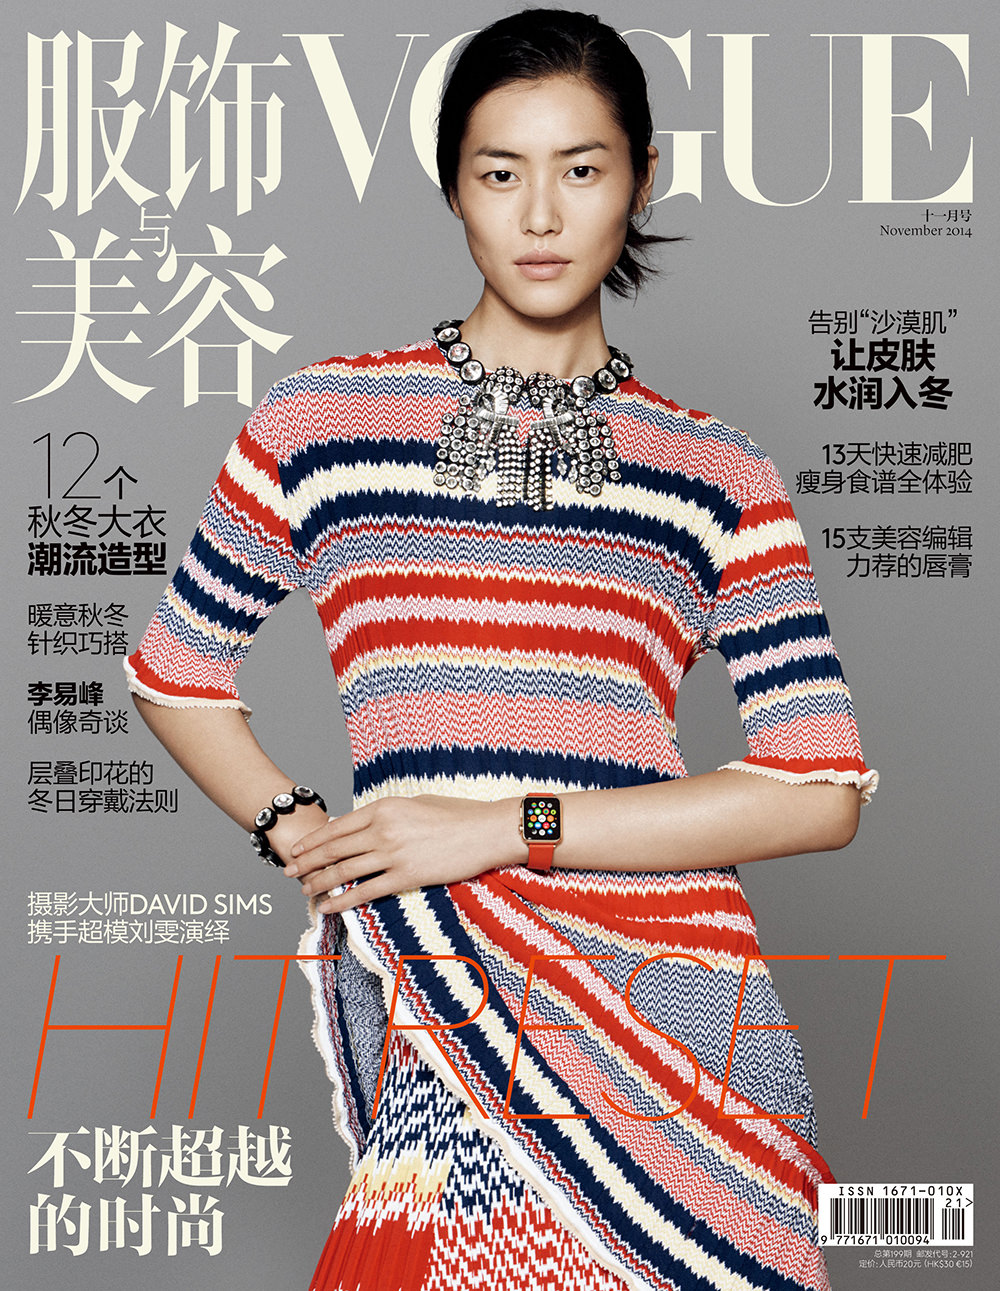 China Vogue featuring Apple iWatch